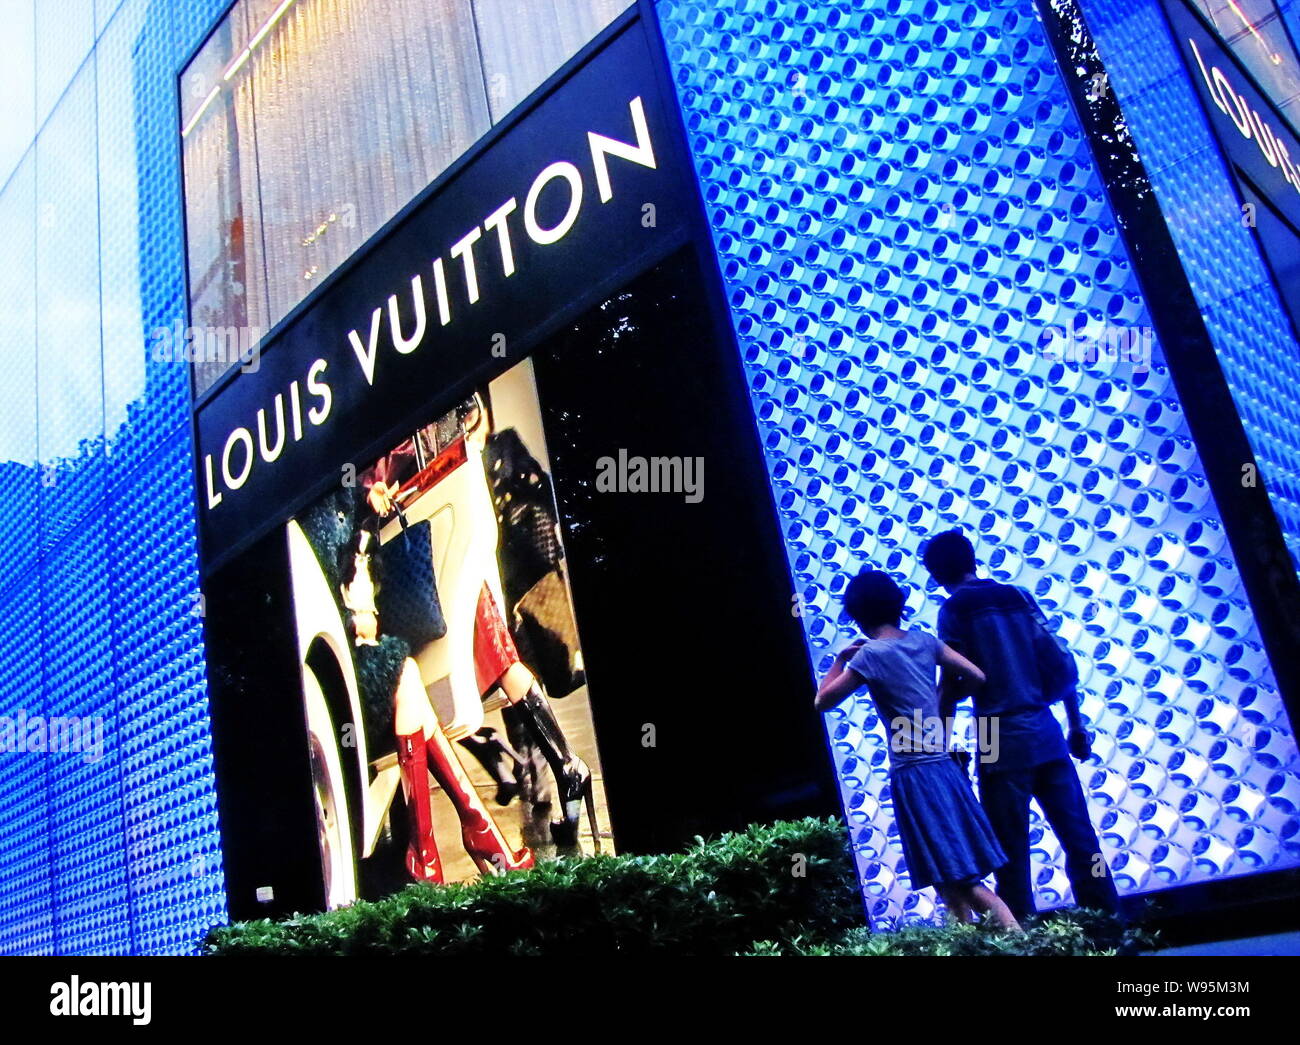 File--View of a Louis Vuitton (LV) store in Shanghai, China, 30